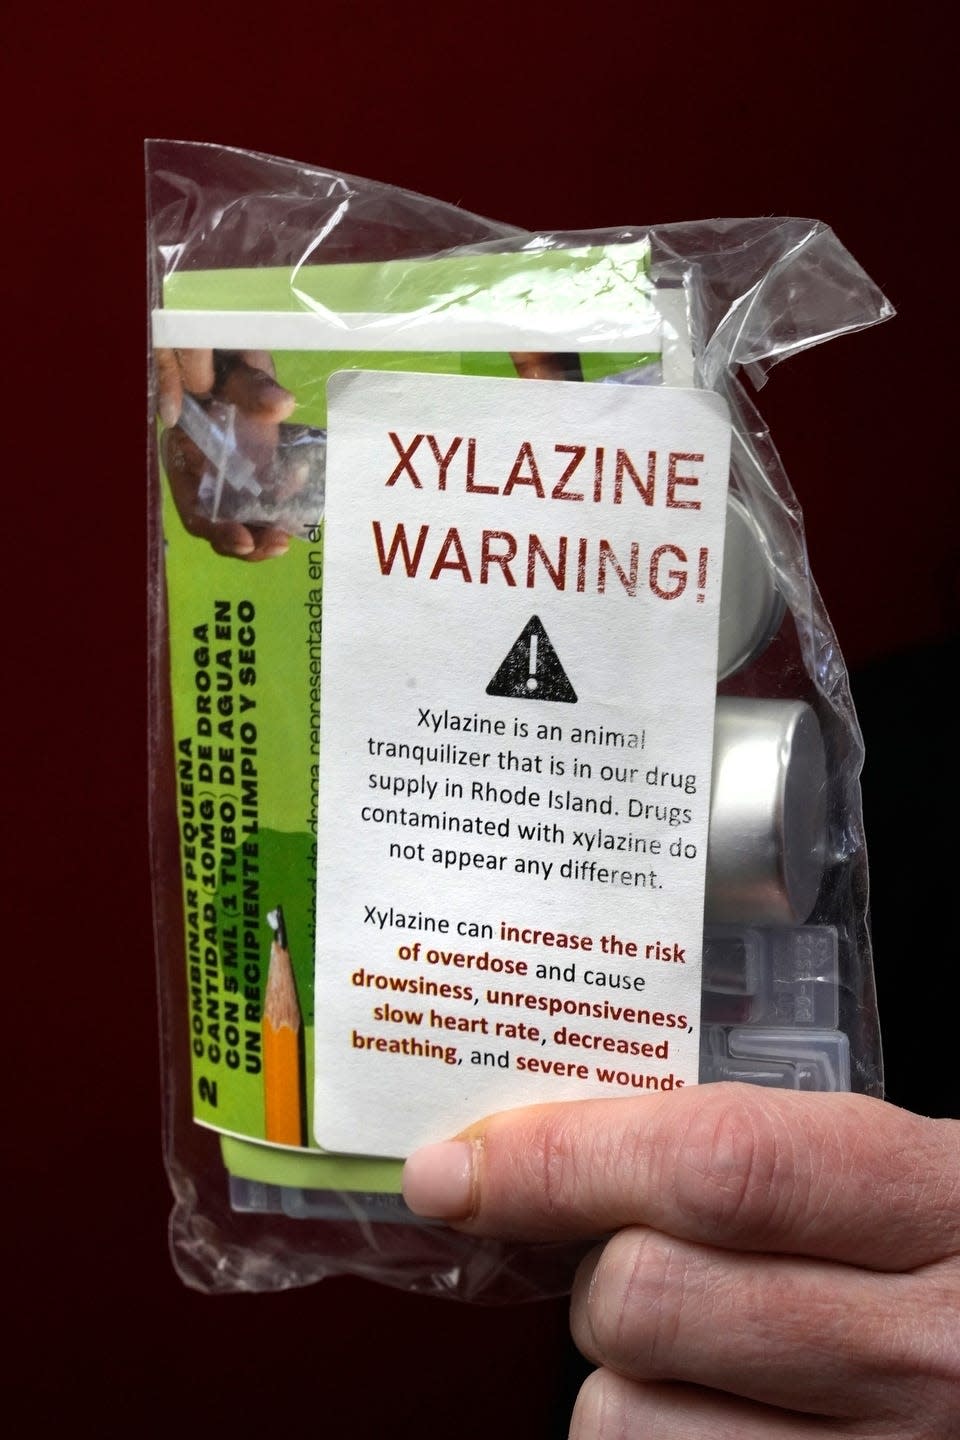 Xylazine is often mixed into fentanyl, and it can cause devastating skin ulcerations and necrotic wounds if injected repeatedly.